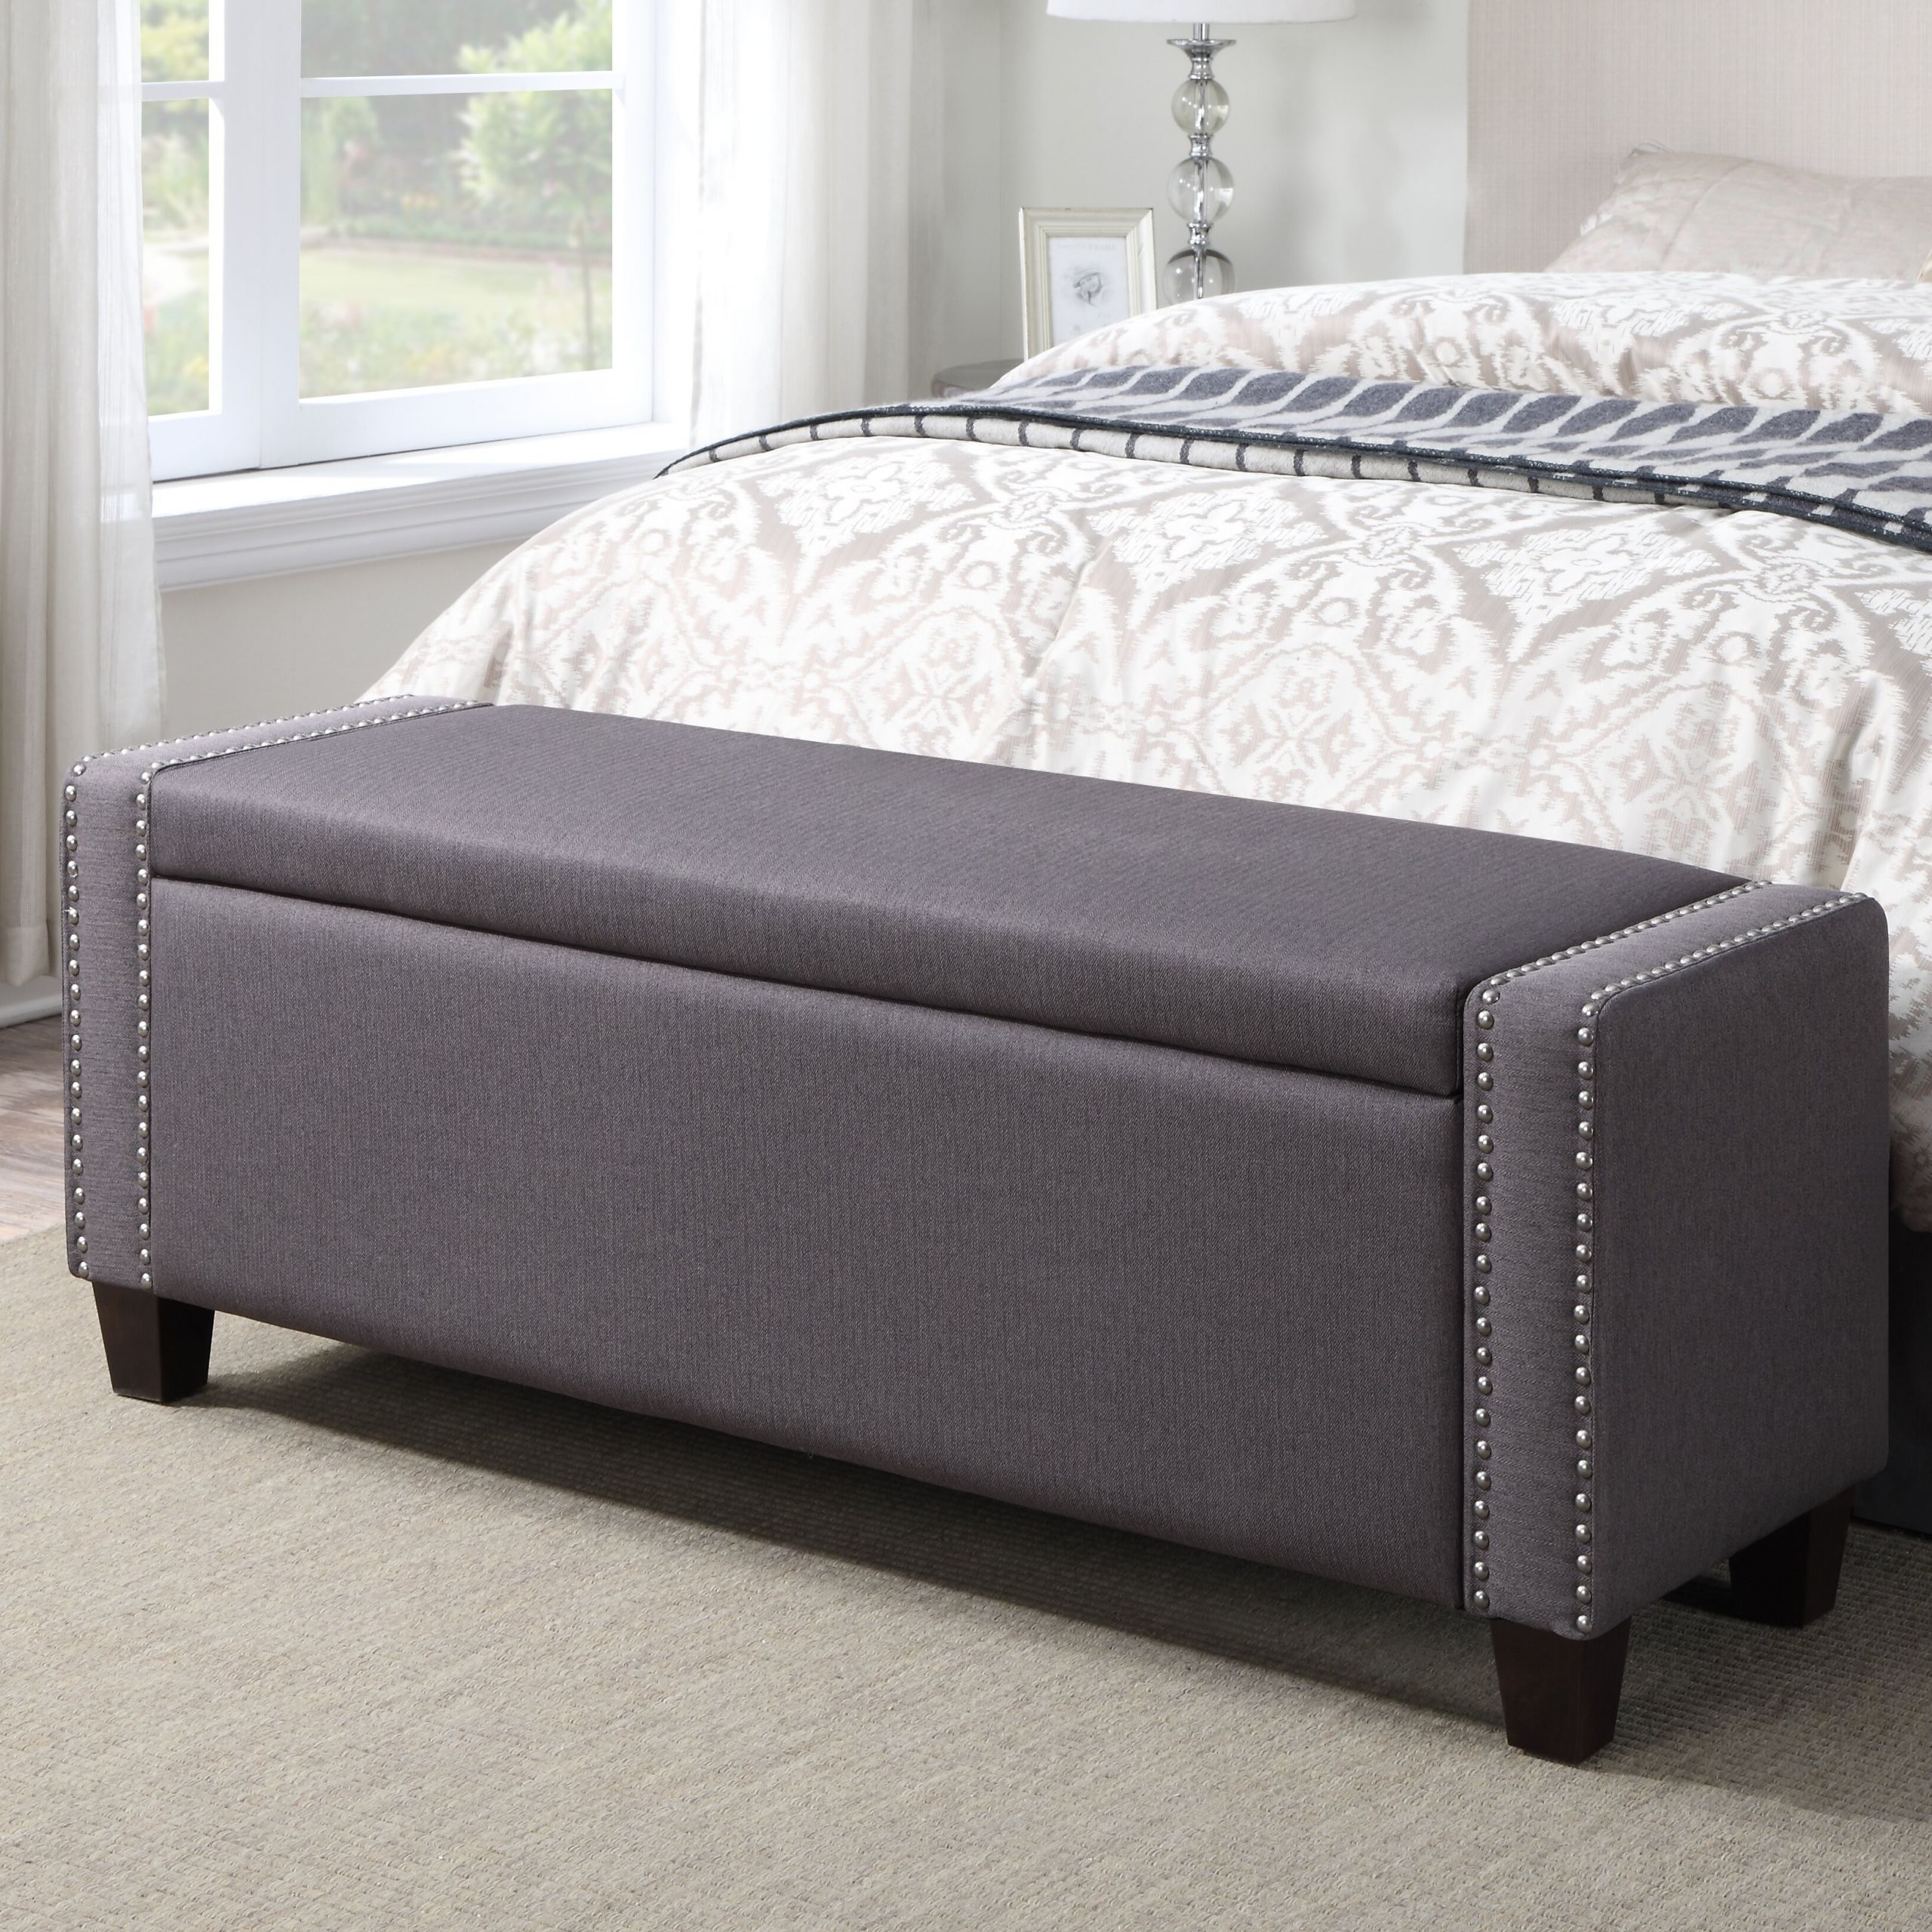 Space saving Strategies: Incorporating A Bedroom Storage Bench